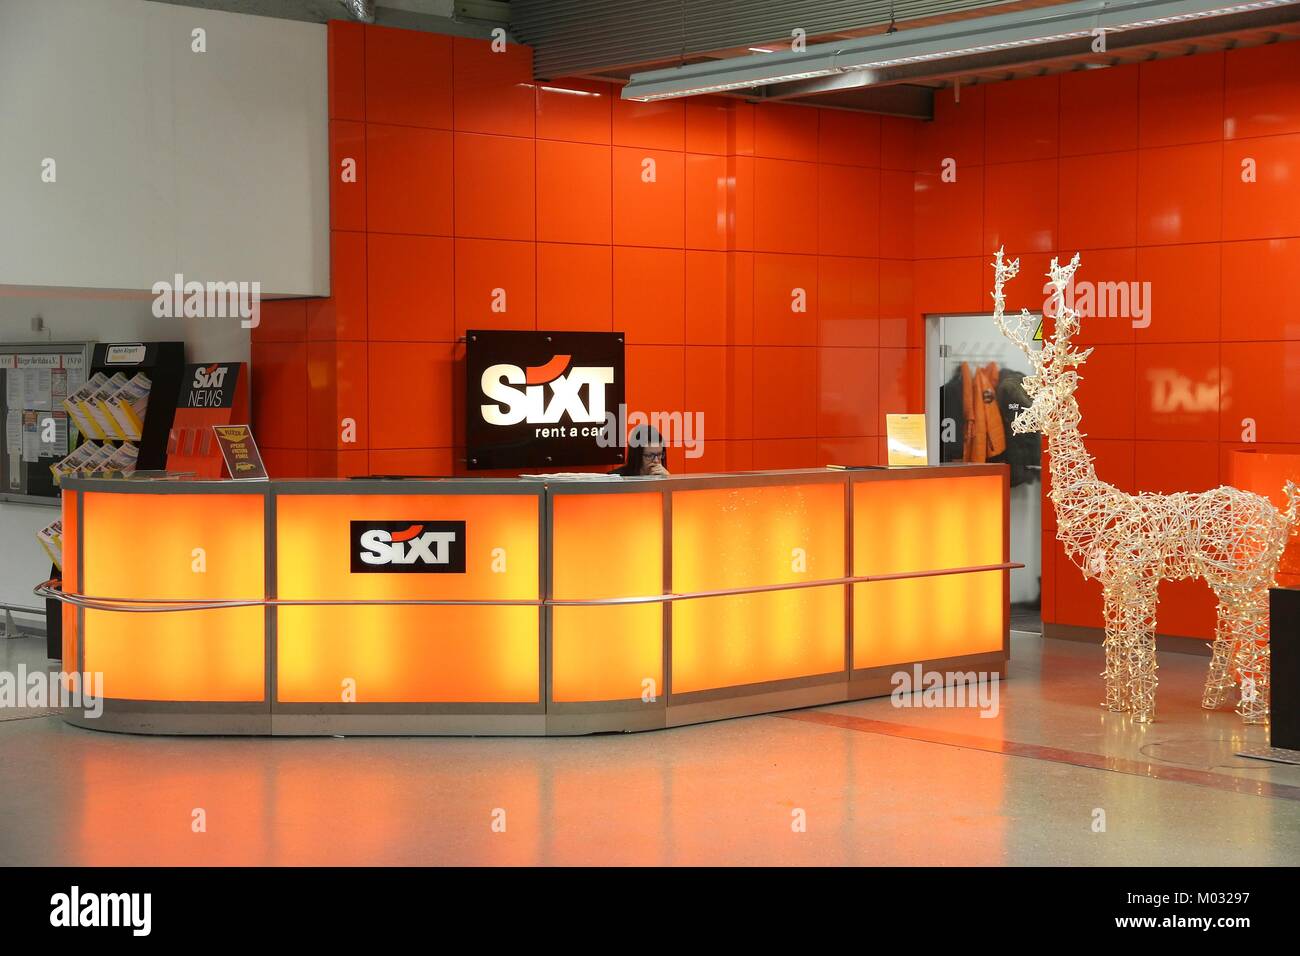 HAHN, GERMANY - DECEMBER 7, 2016: Sixt car rental employee waits for customers at Frankfurt Hahn Airport in Germany. Sixt has some 4,000 locations in  Stock Photo